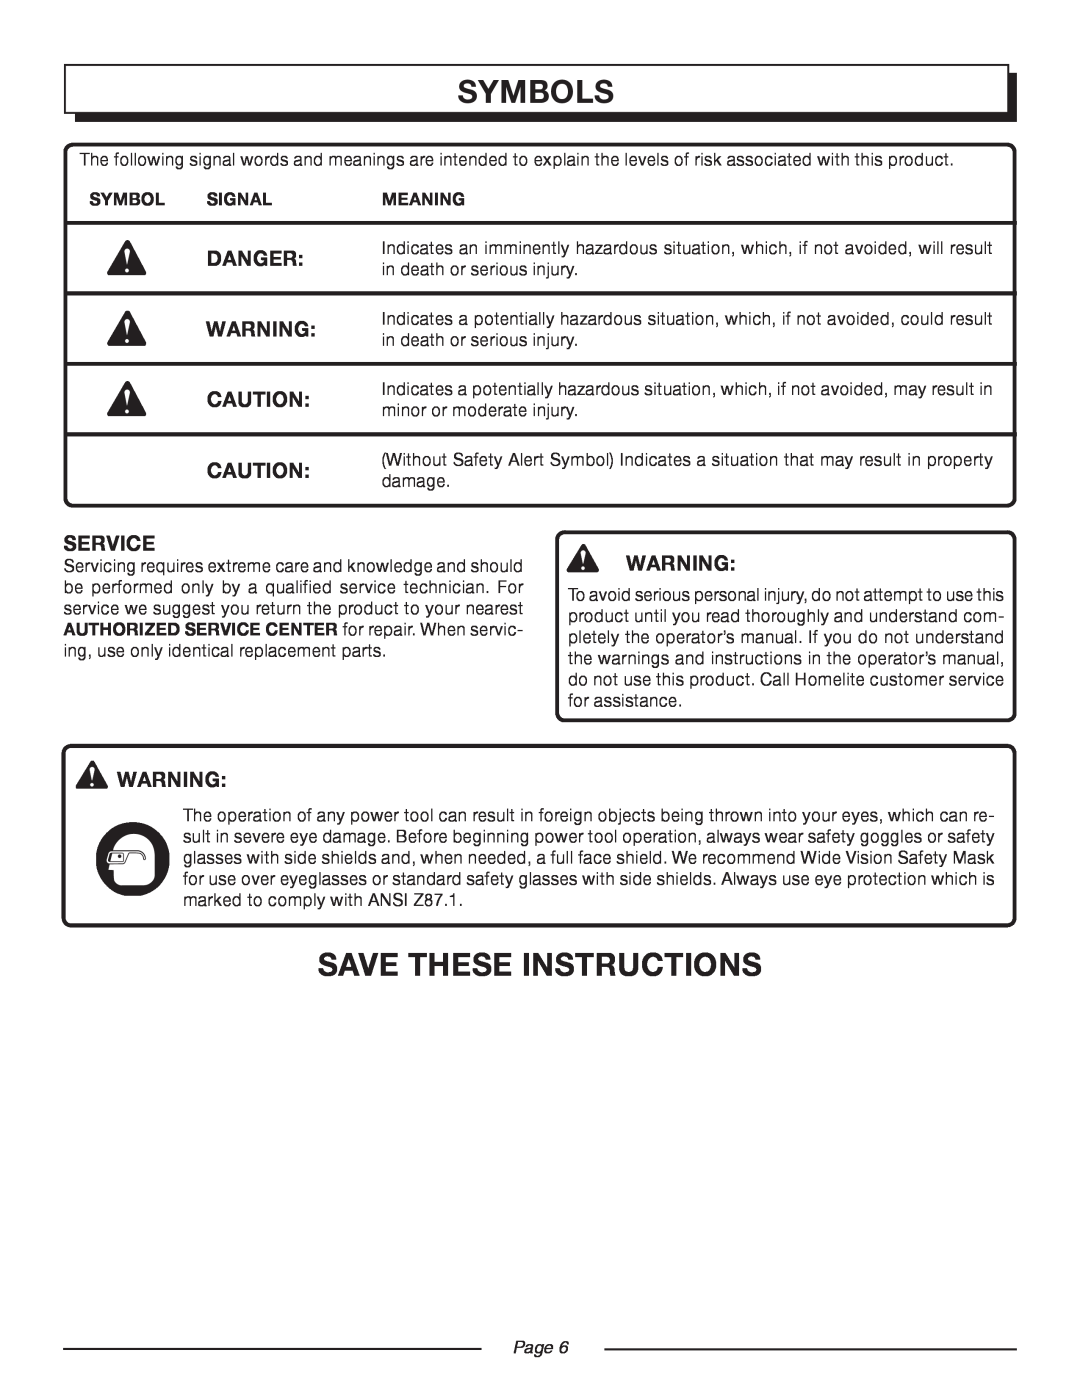 Homelite UT13118, UT13120 manual Save These Instructions, Danger, Service, Symbols, Signal, Meaning, Page 